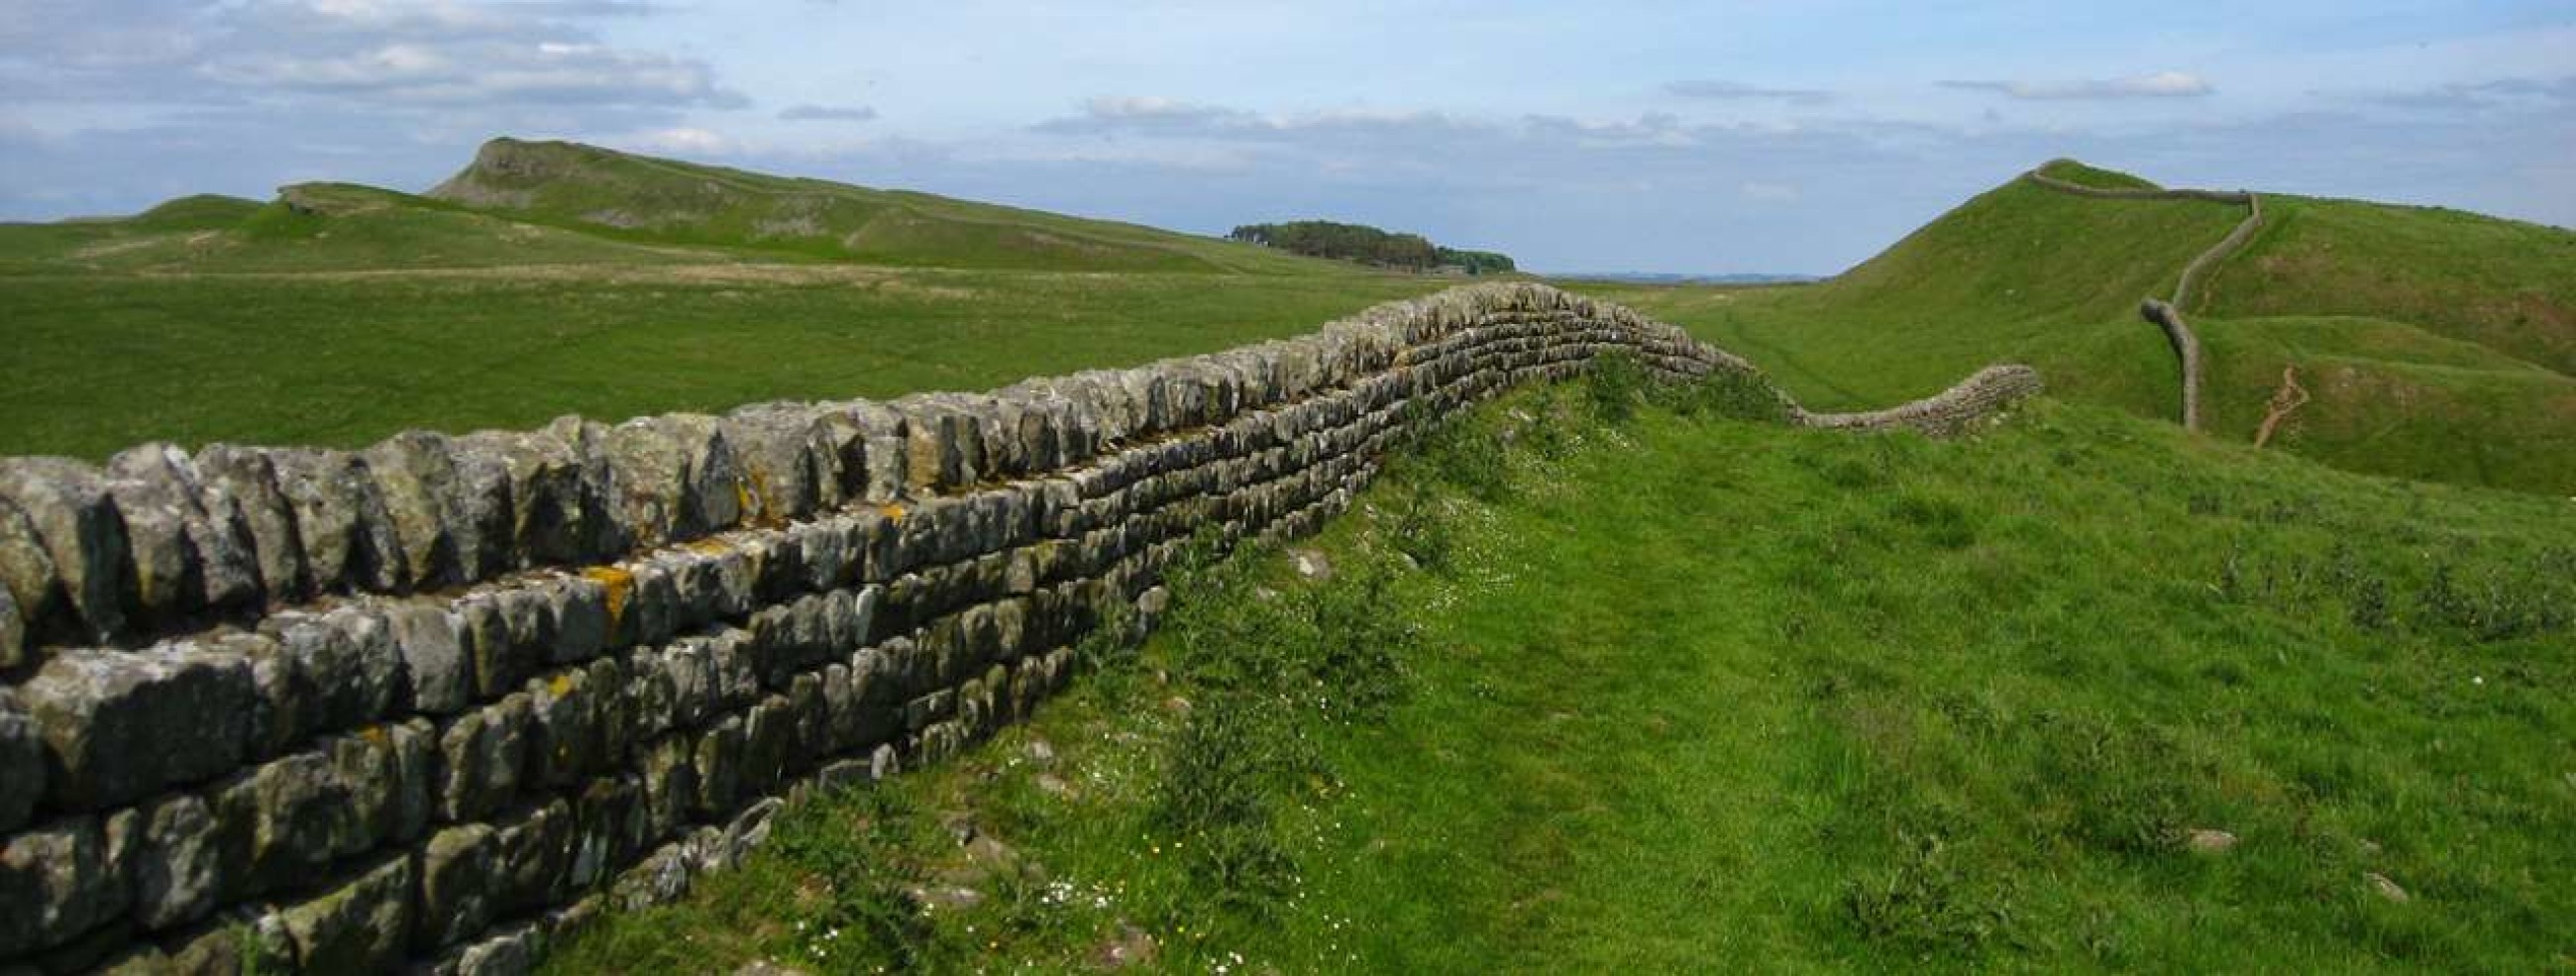 Hadrian's Wall Pics, Man Made Collection